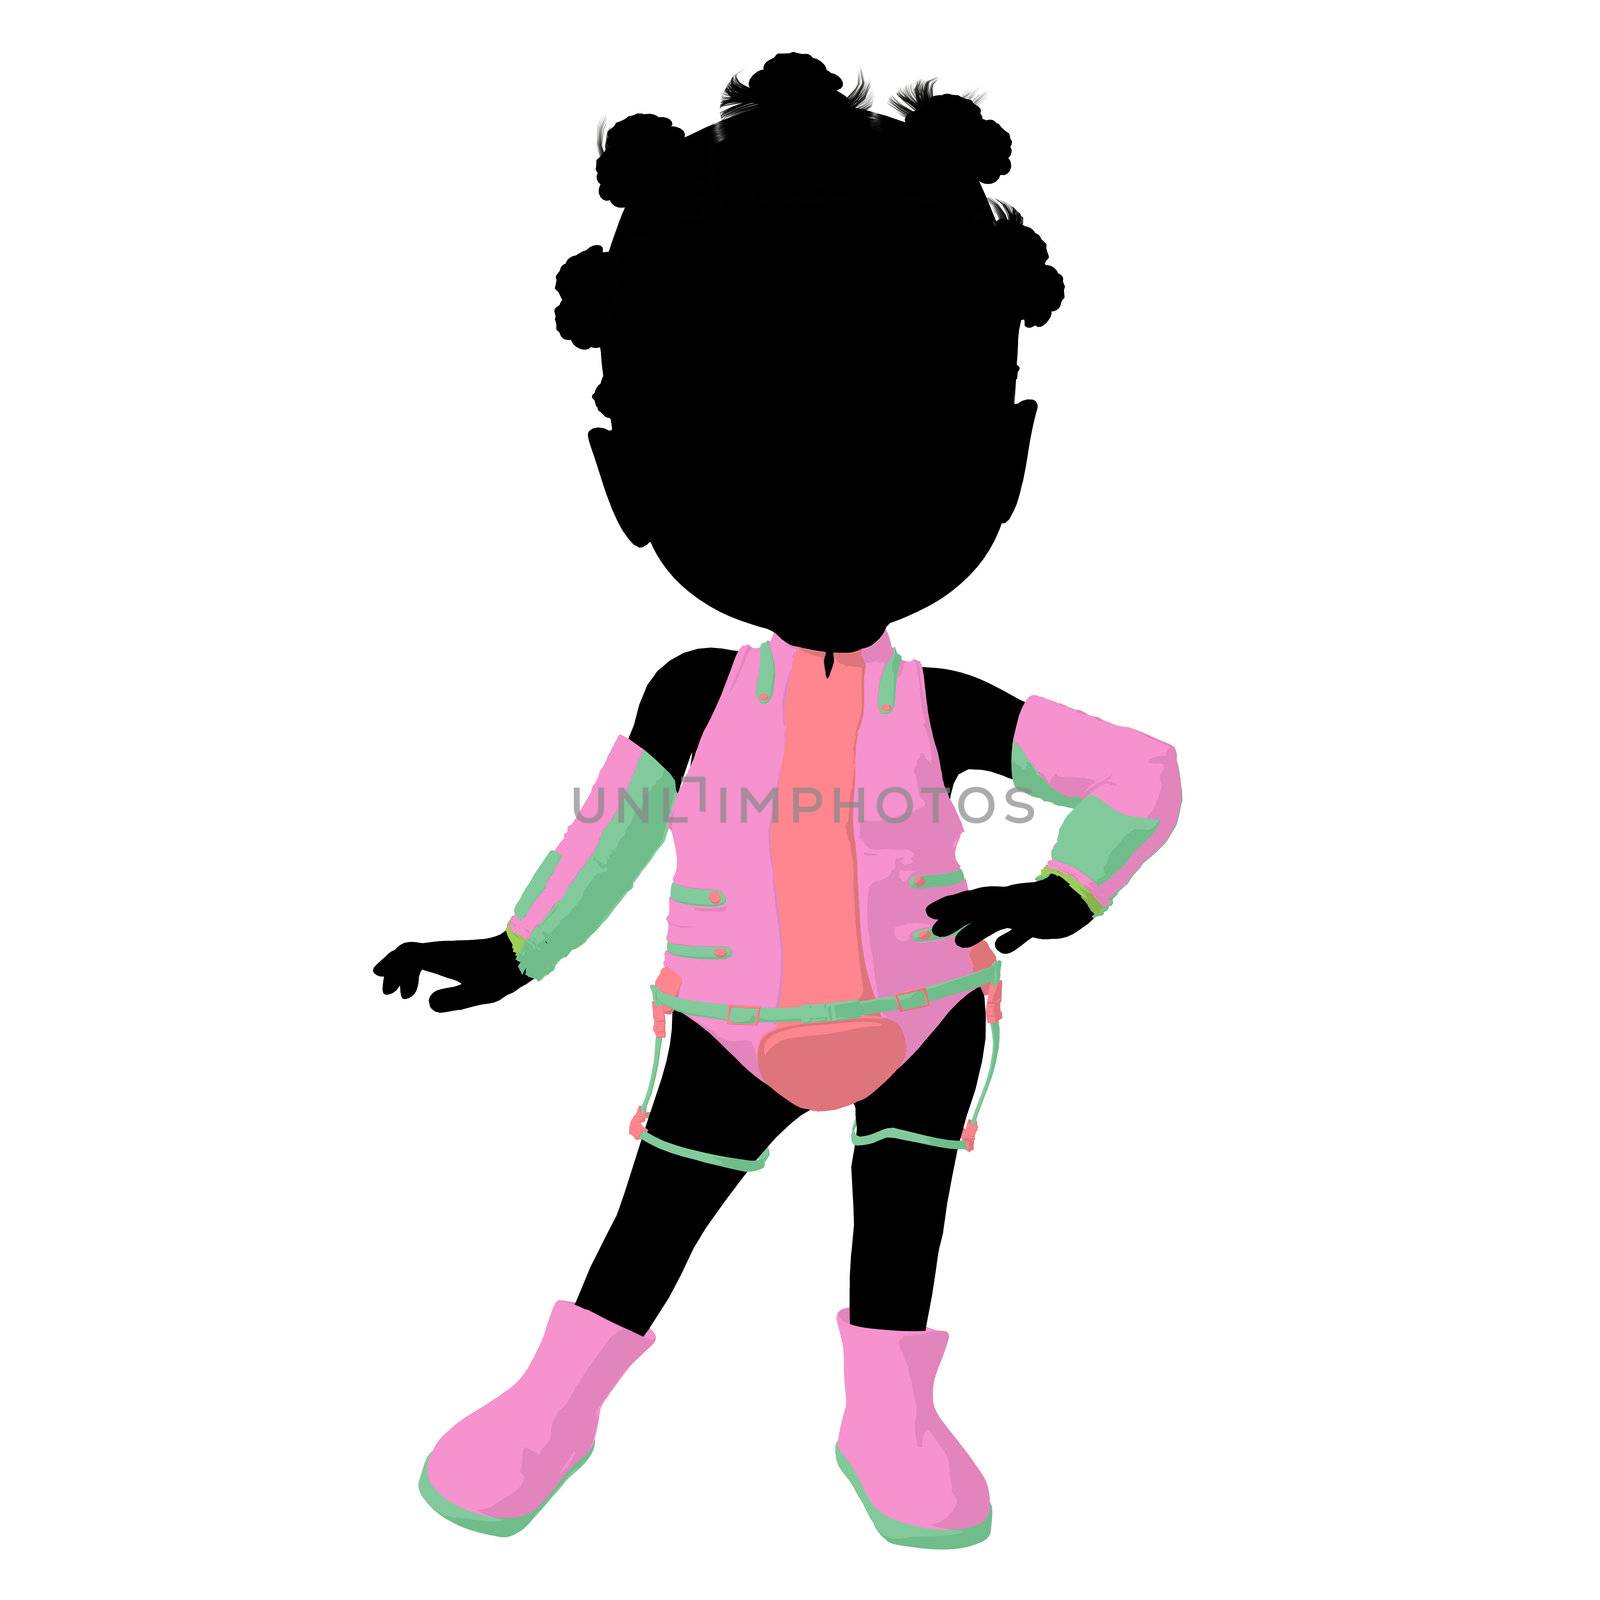 Little African American Sci Fi Girl Illustration Silhouette by kathygold